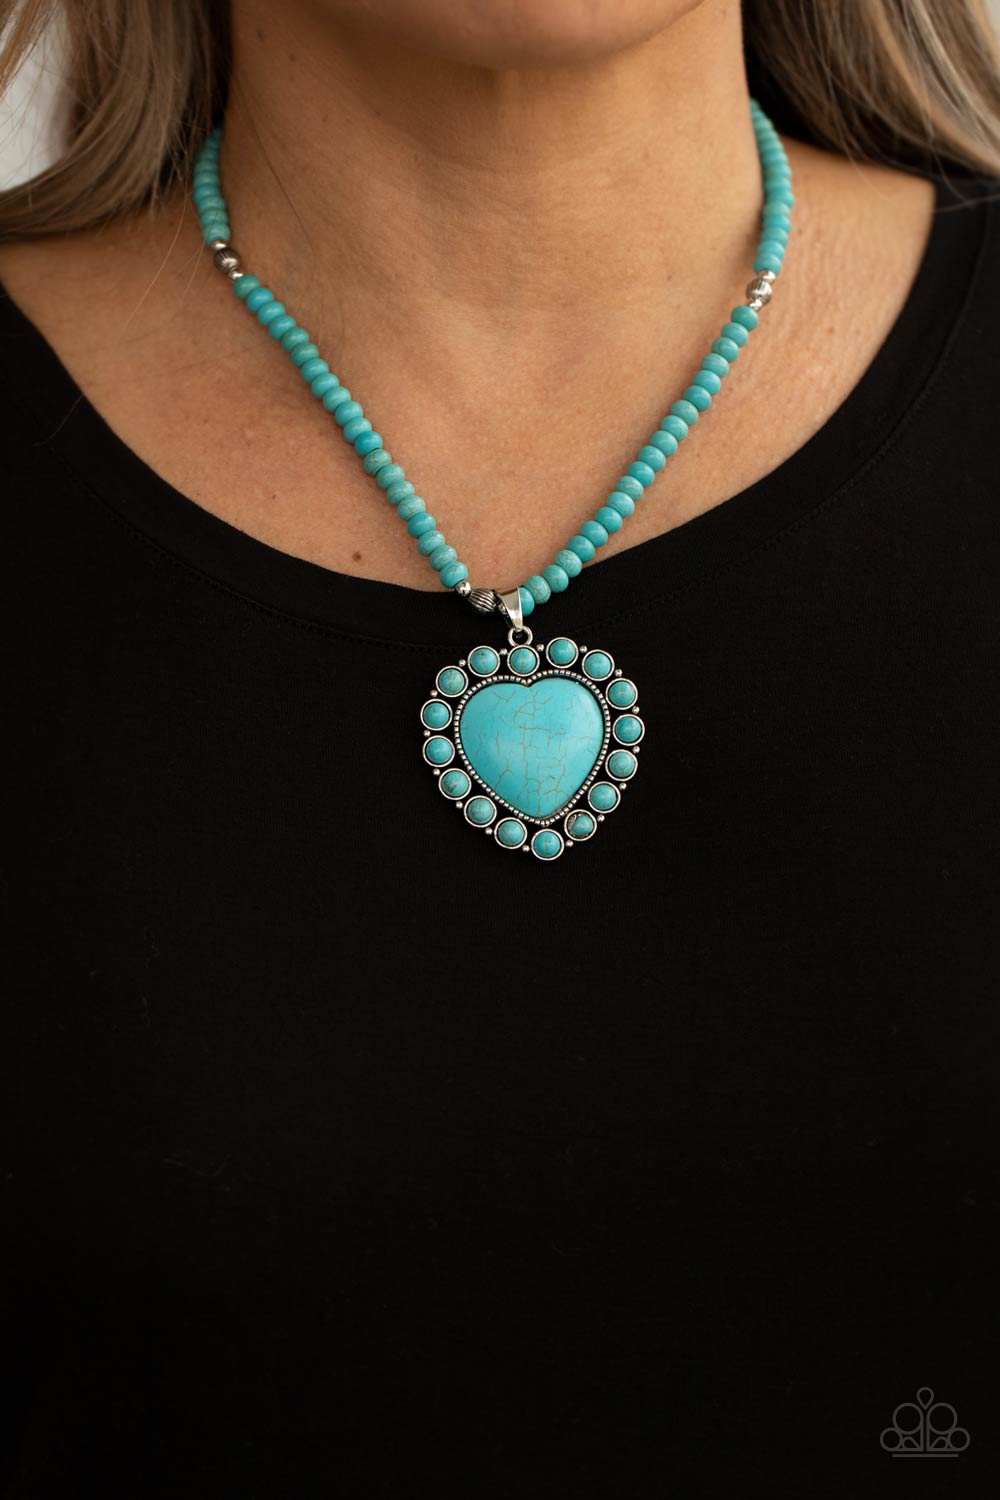 Paparazzi A Heart Of Stone Blue Short Necklace - Life Of The Party Exclusive April 2021